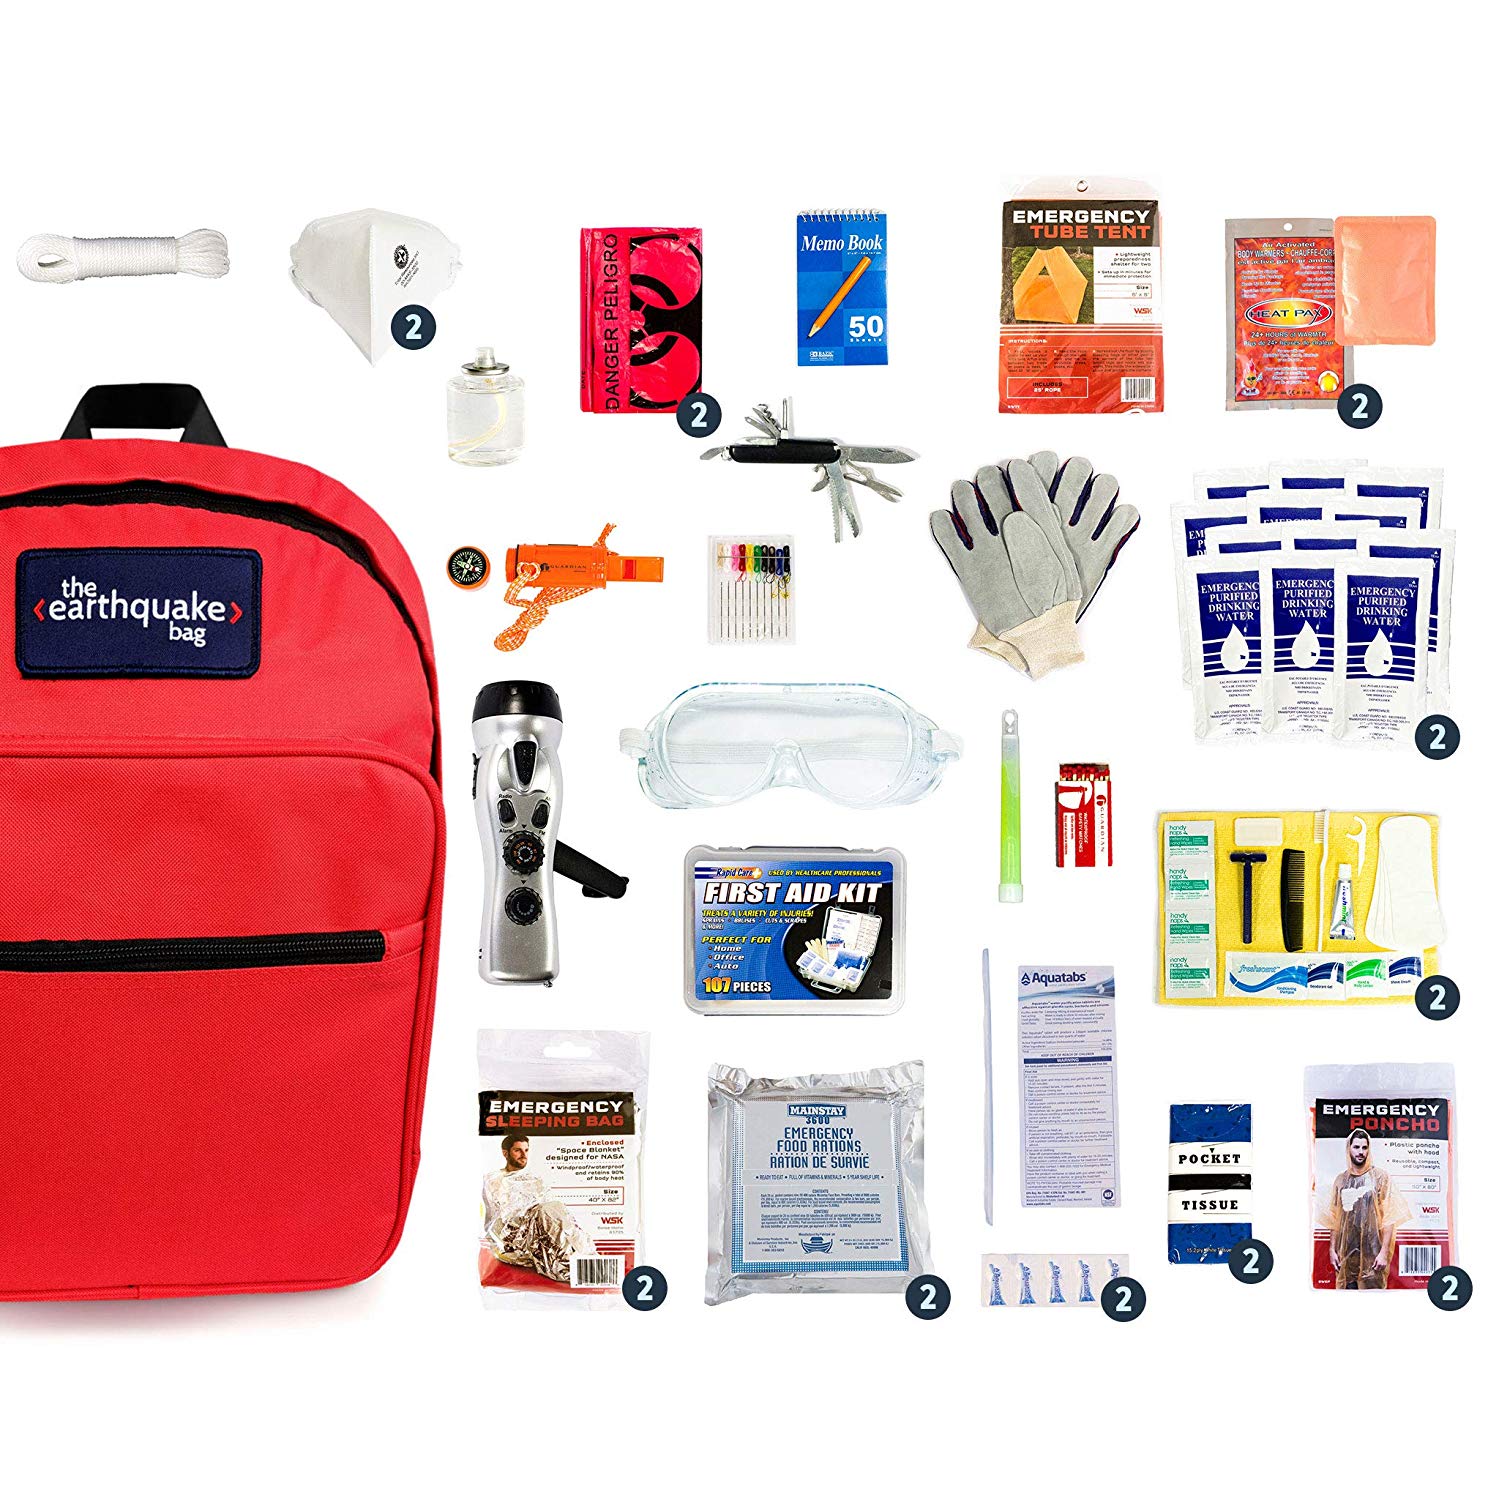 Best Emergency kit for Earthquakes, Hurricanes, floods and Other disasters